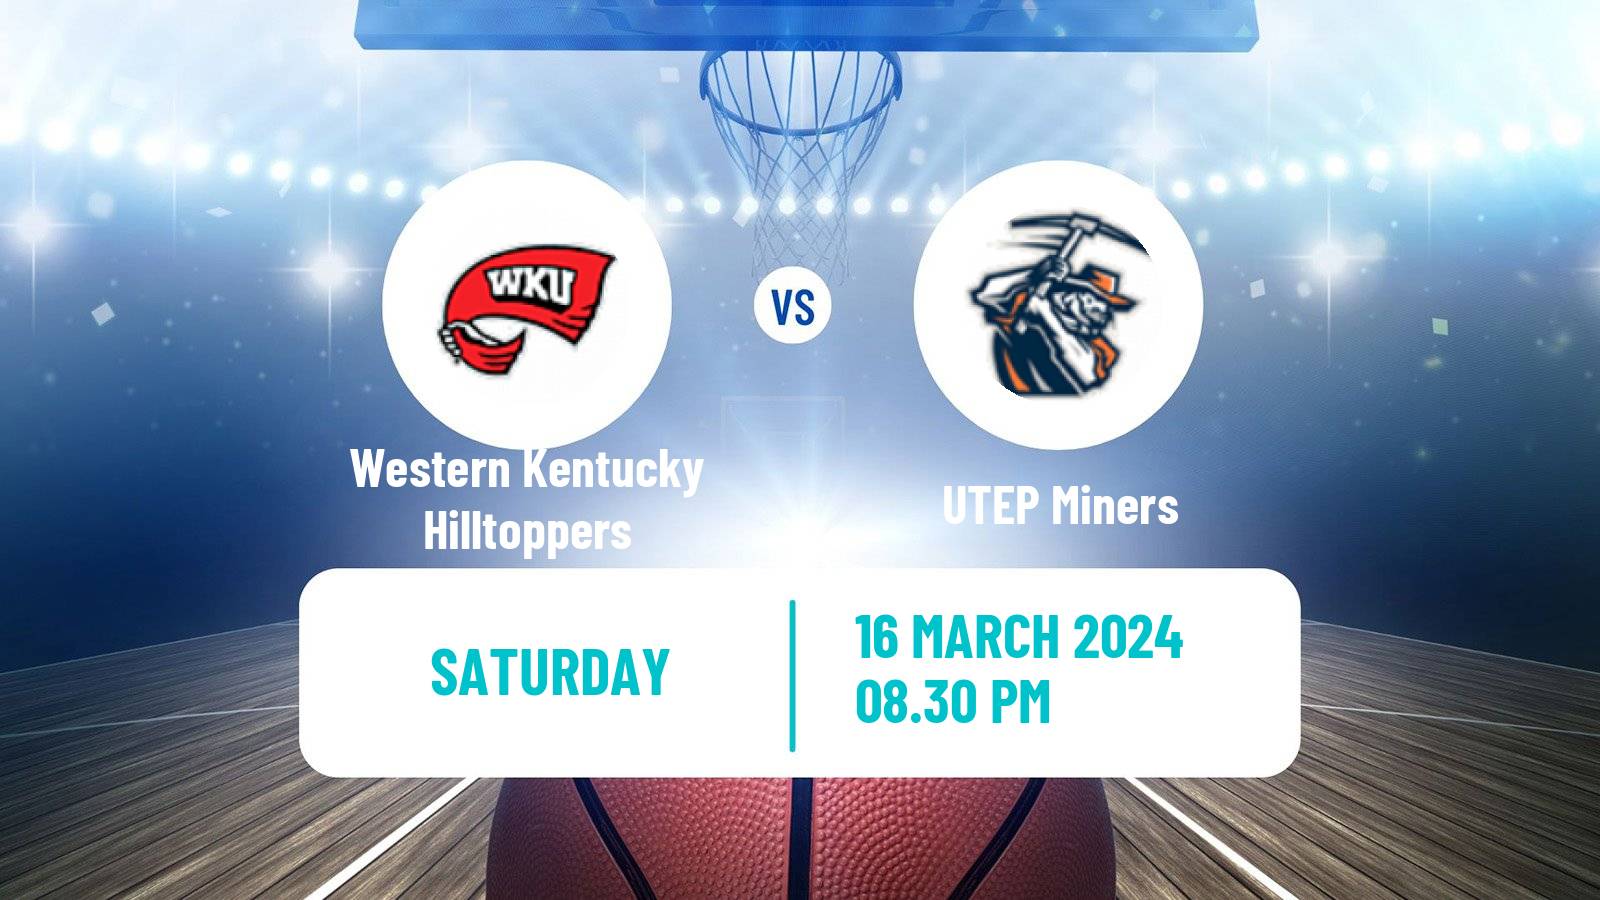 Basketball NCAA College Basketball Western Kentucky Hilltoppers - UTEP Miners